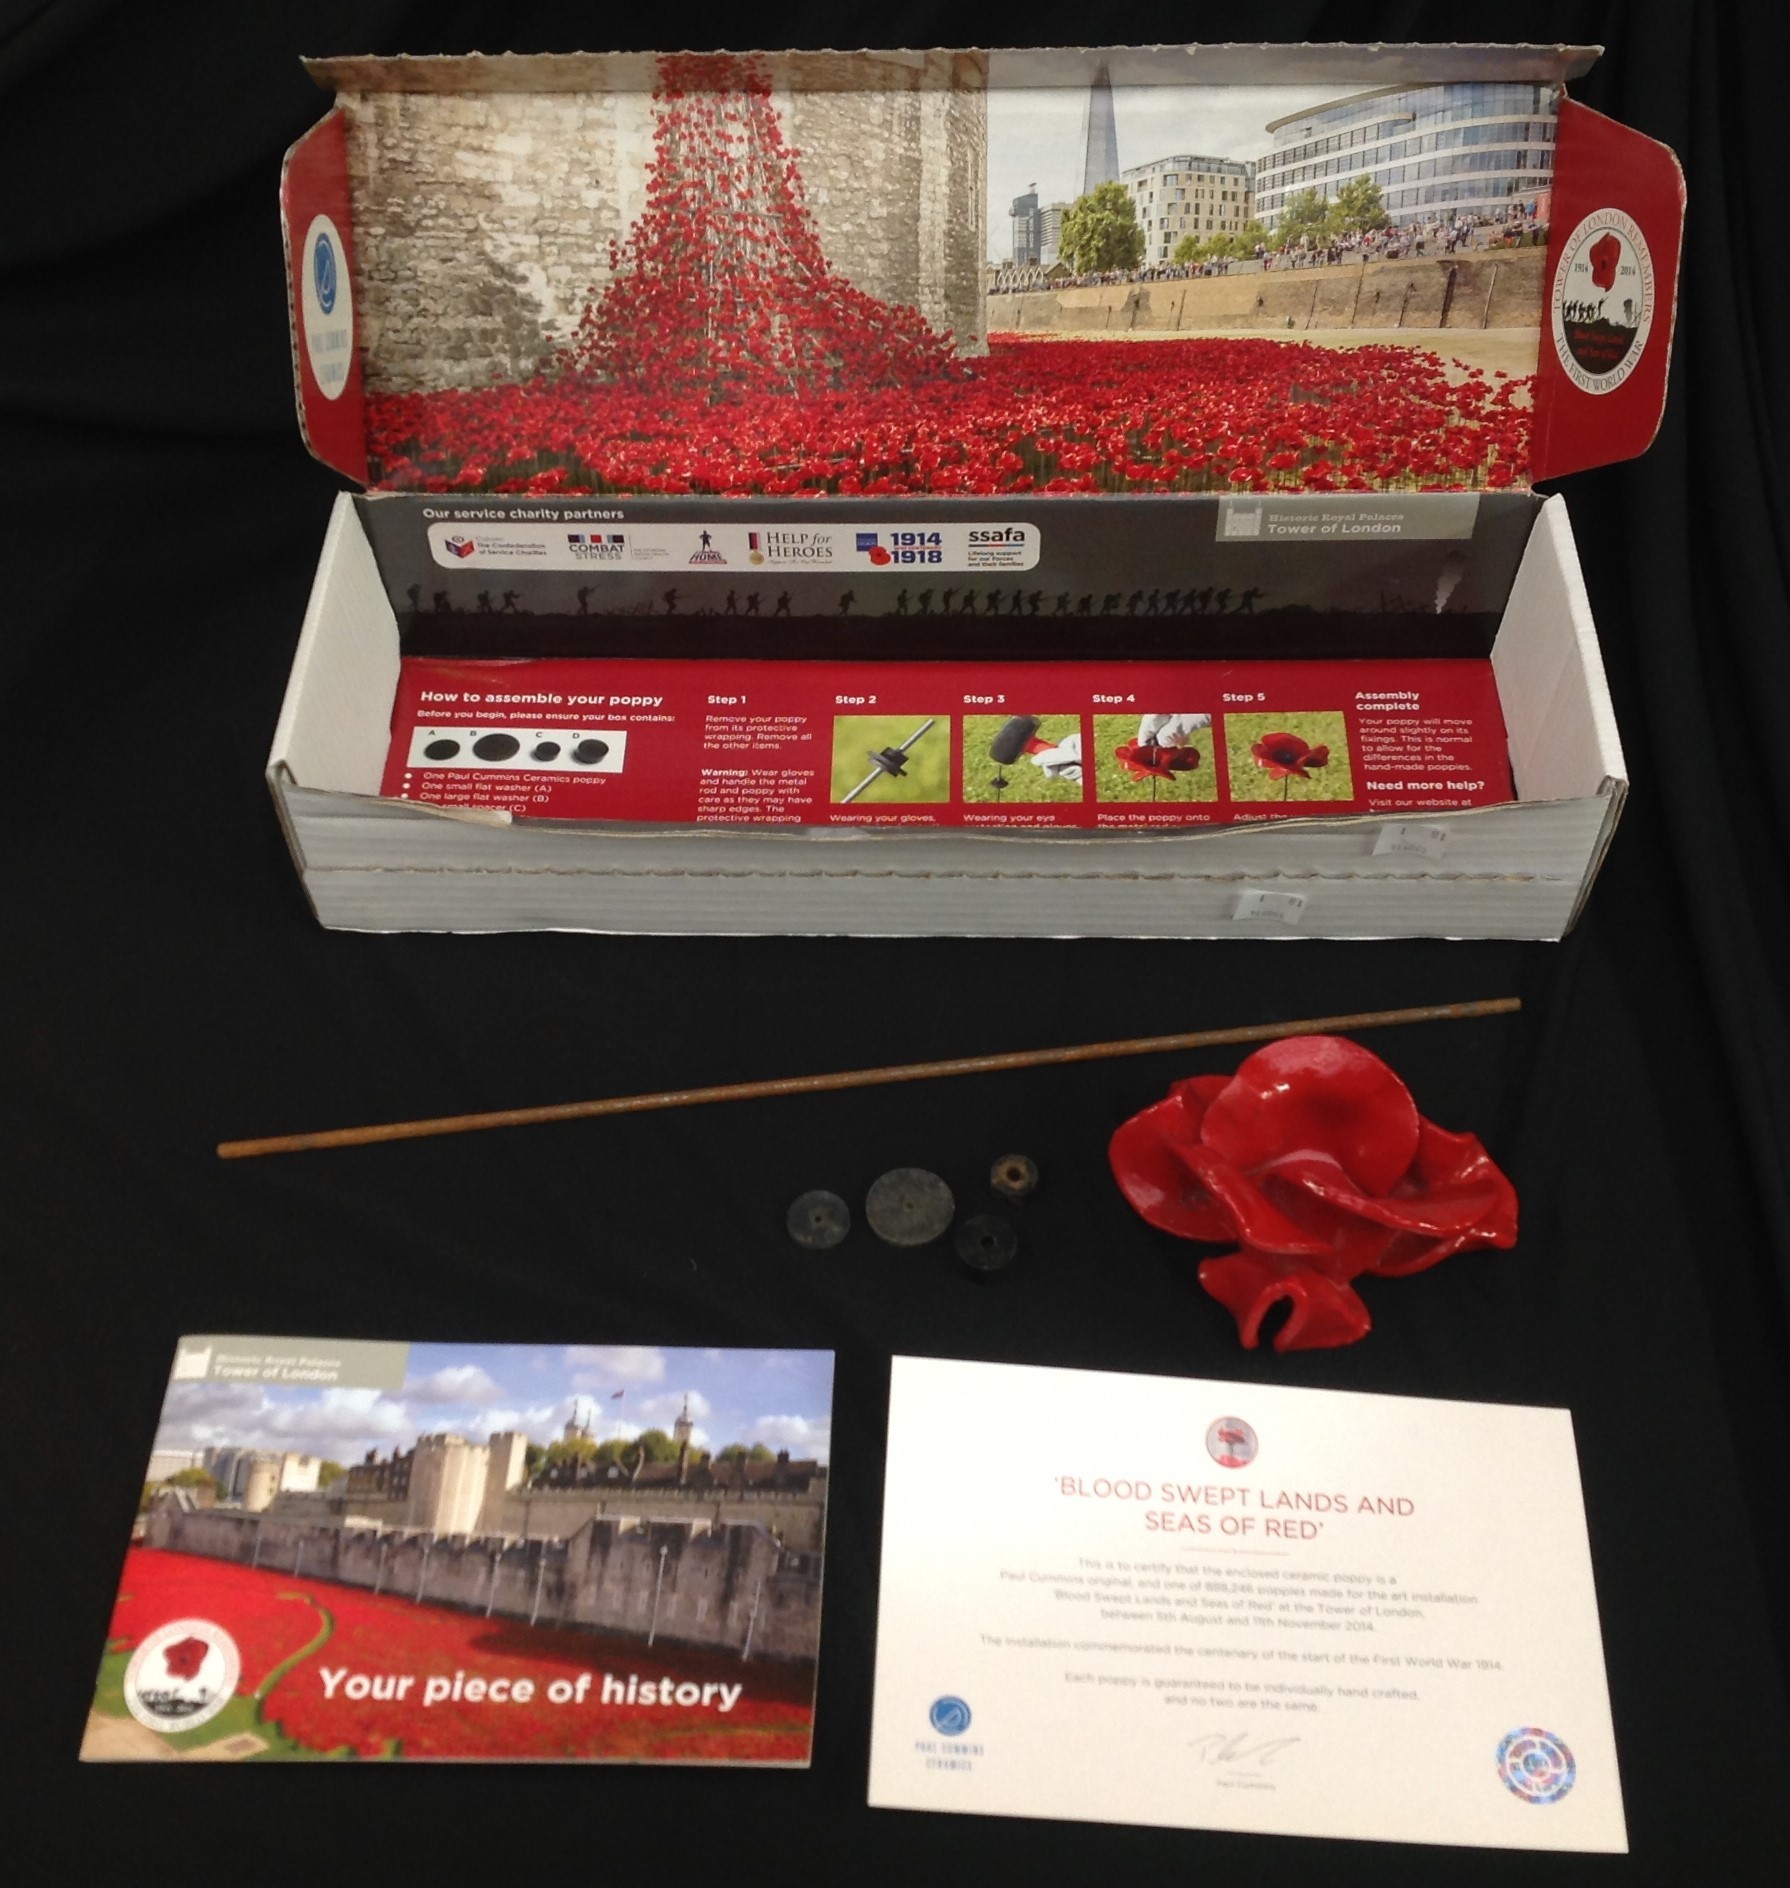 A Royal British Legion Centenary ceramic poppy by Paul Cummins made for the art installation at - Image 2 of 7